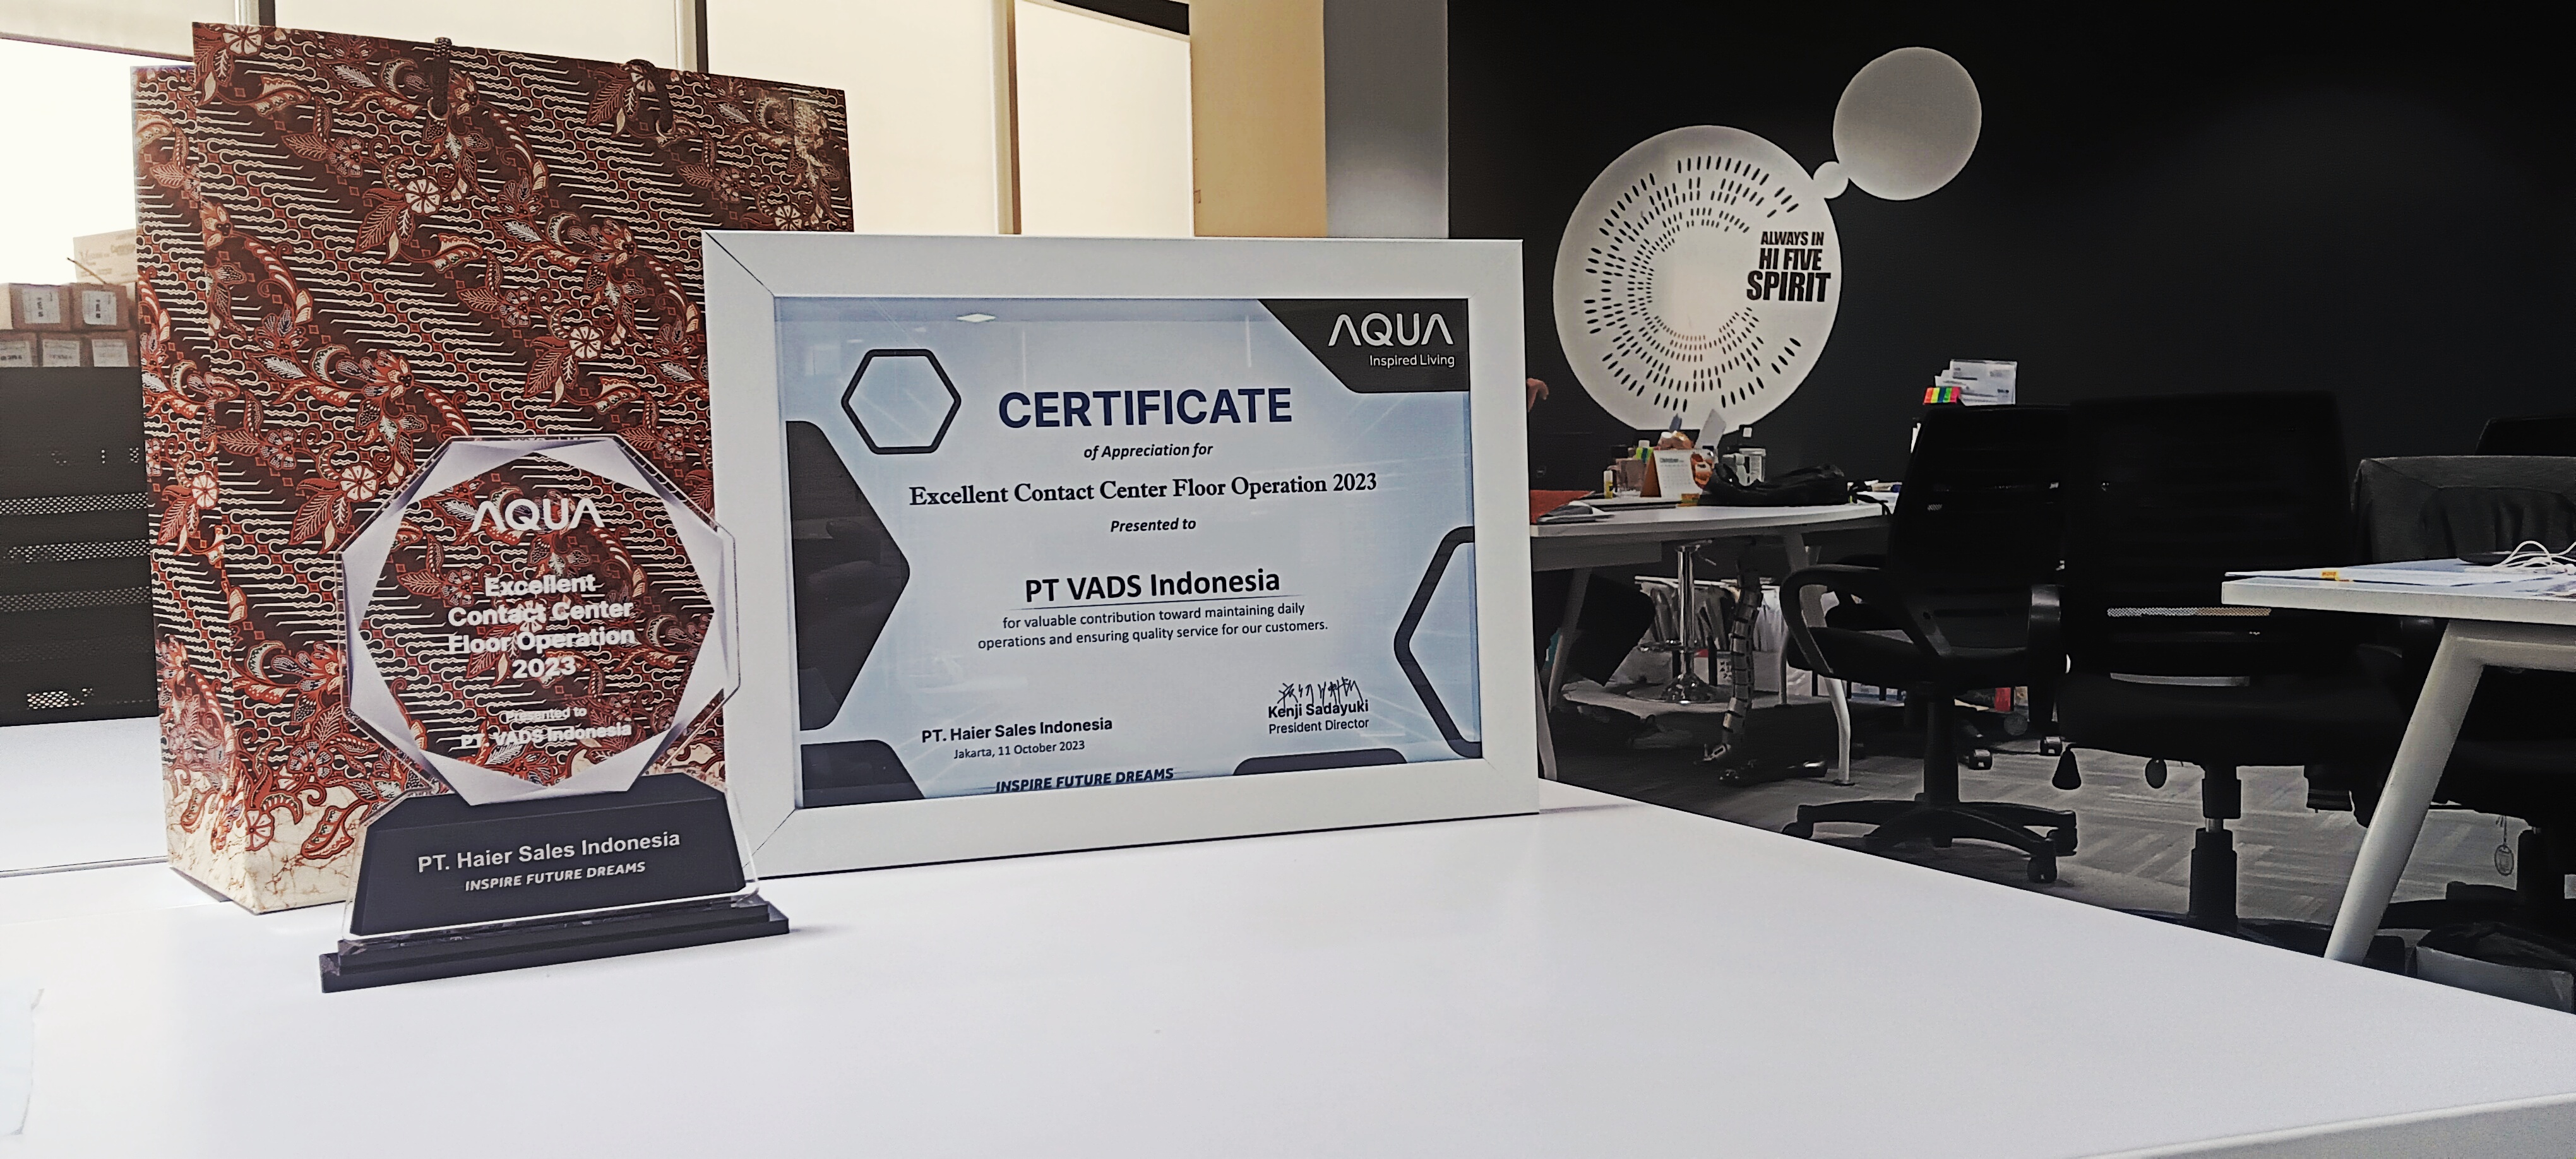 Image of PT VADS Indonesia Awarded "Excellent Contact Center Floor Operation 2023" by PT Haier Sales Indonesia